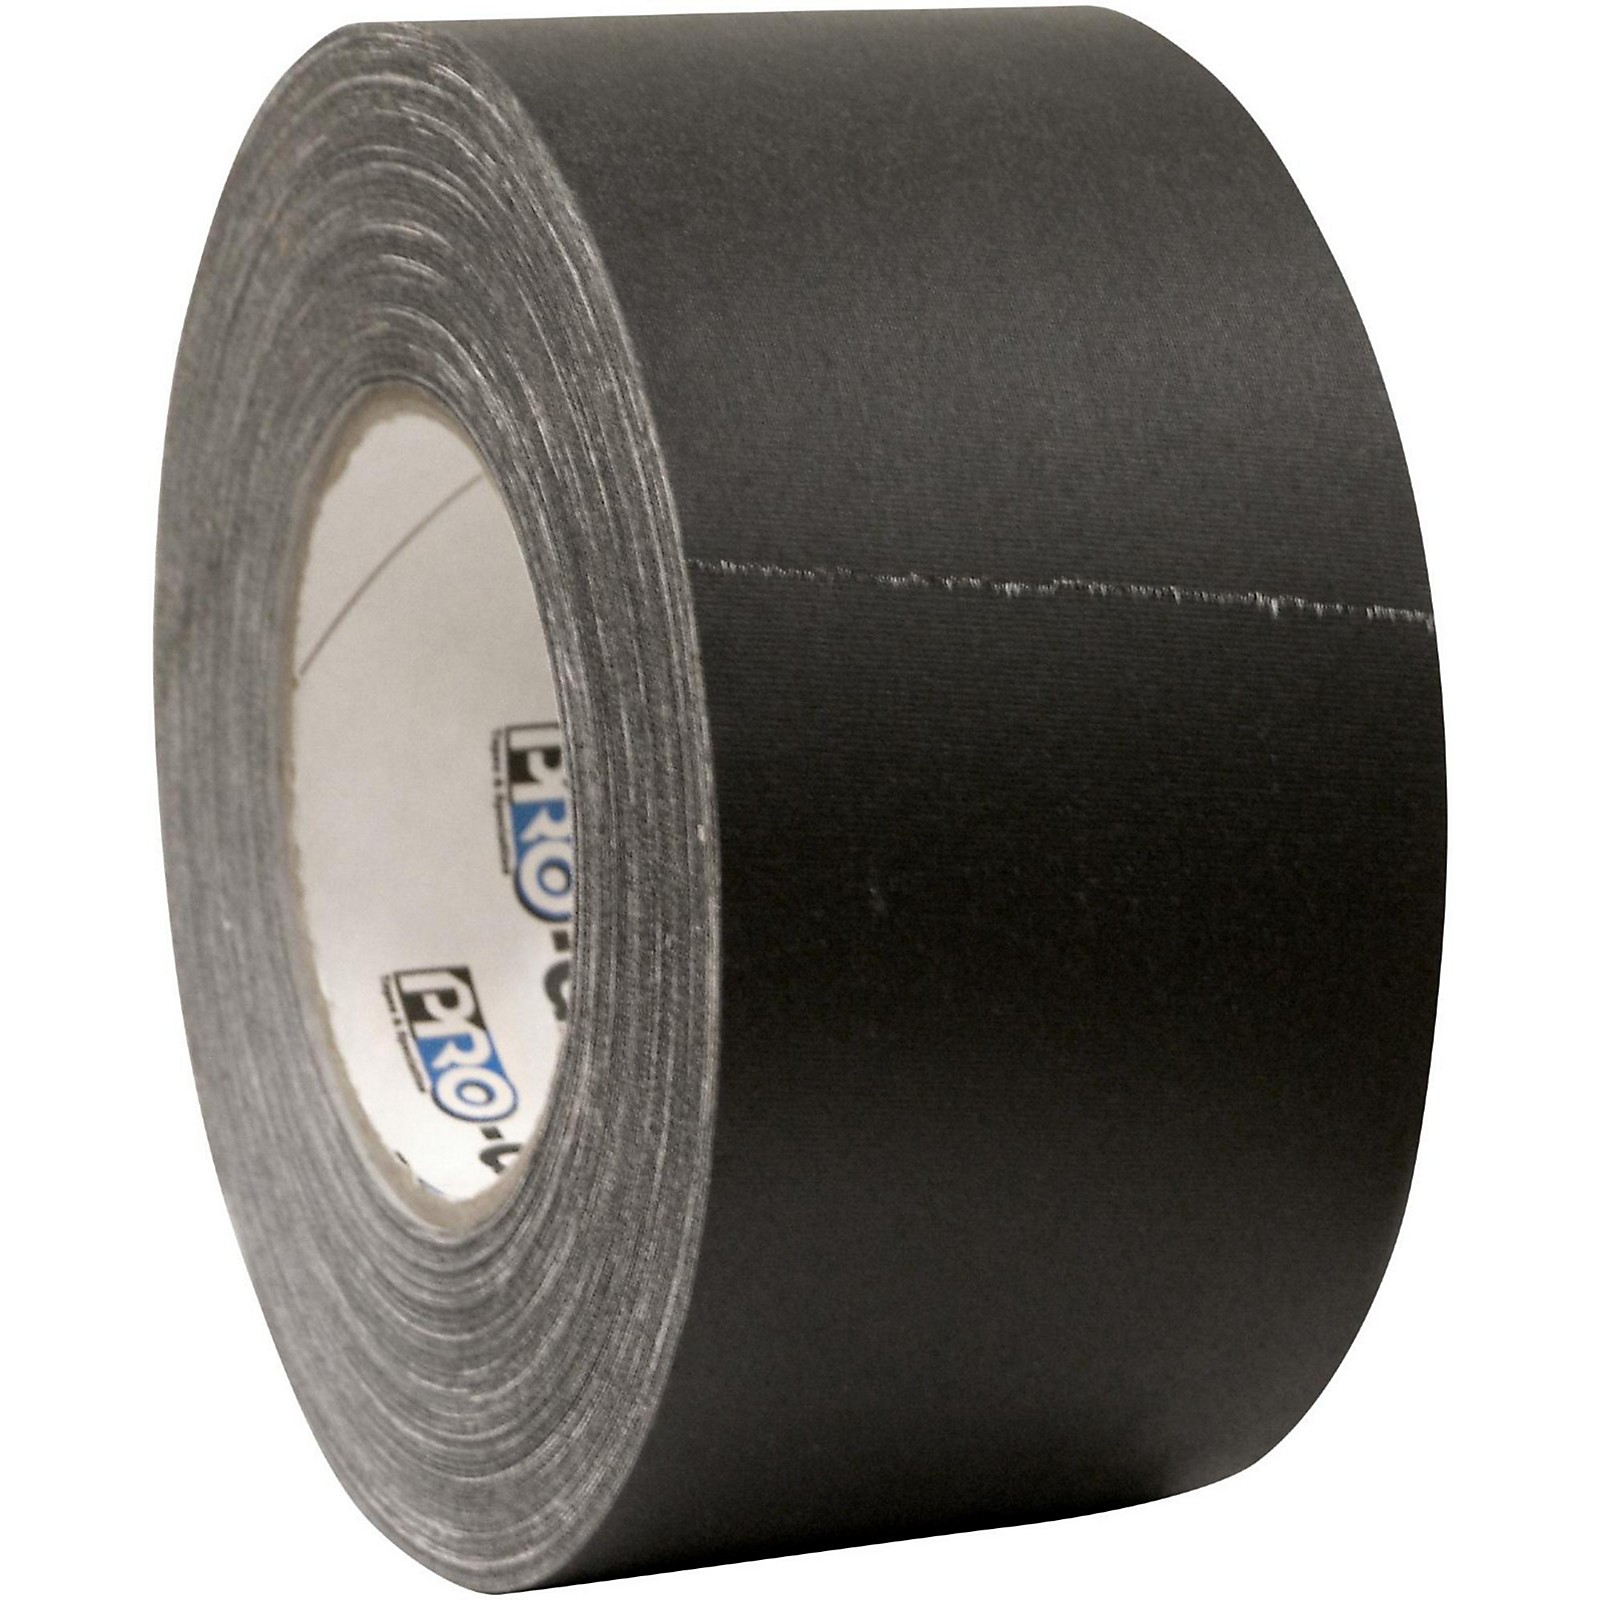 Black Gaffers Tape Factory Seconds 2 x 60 yards (Black Core)